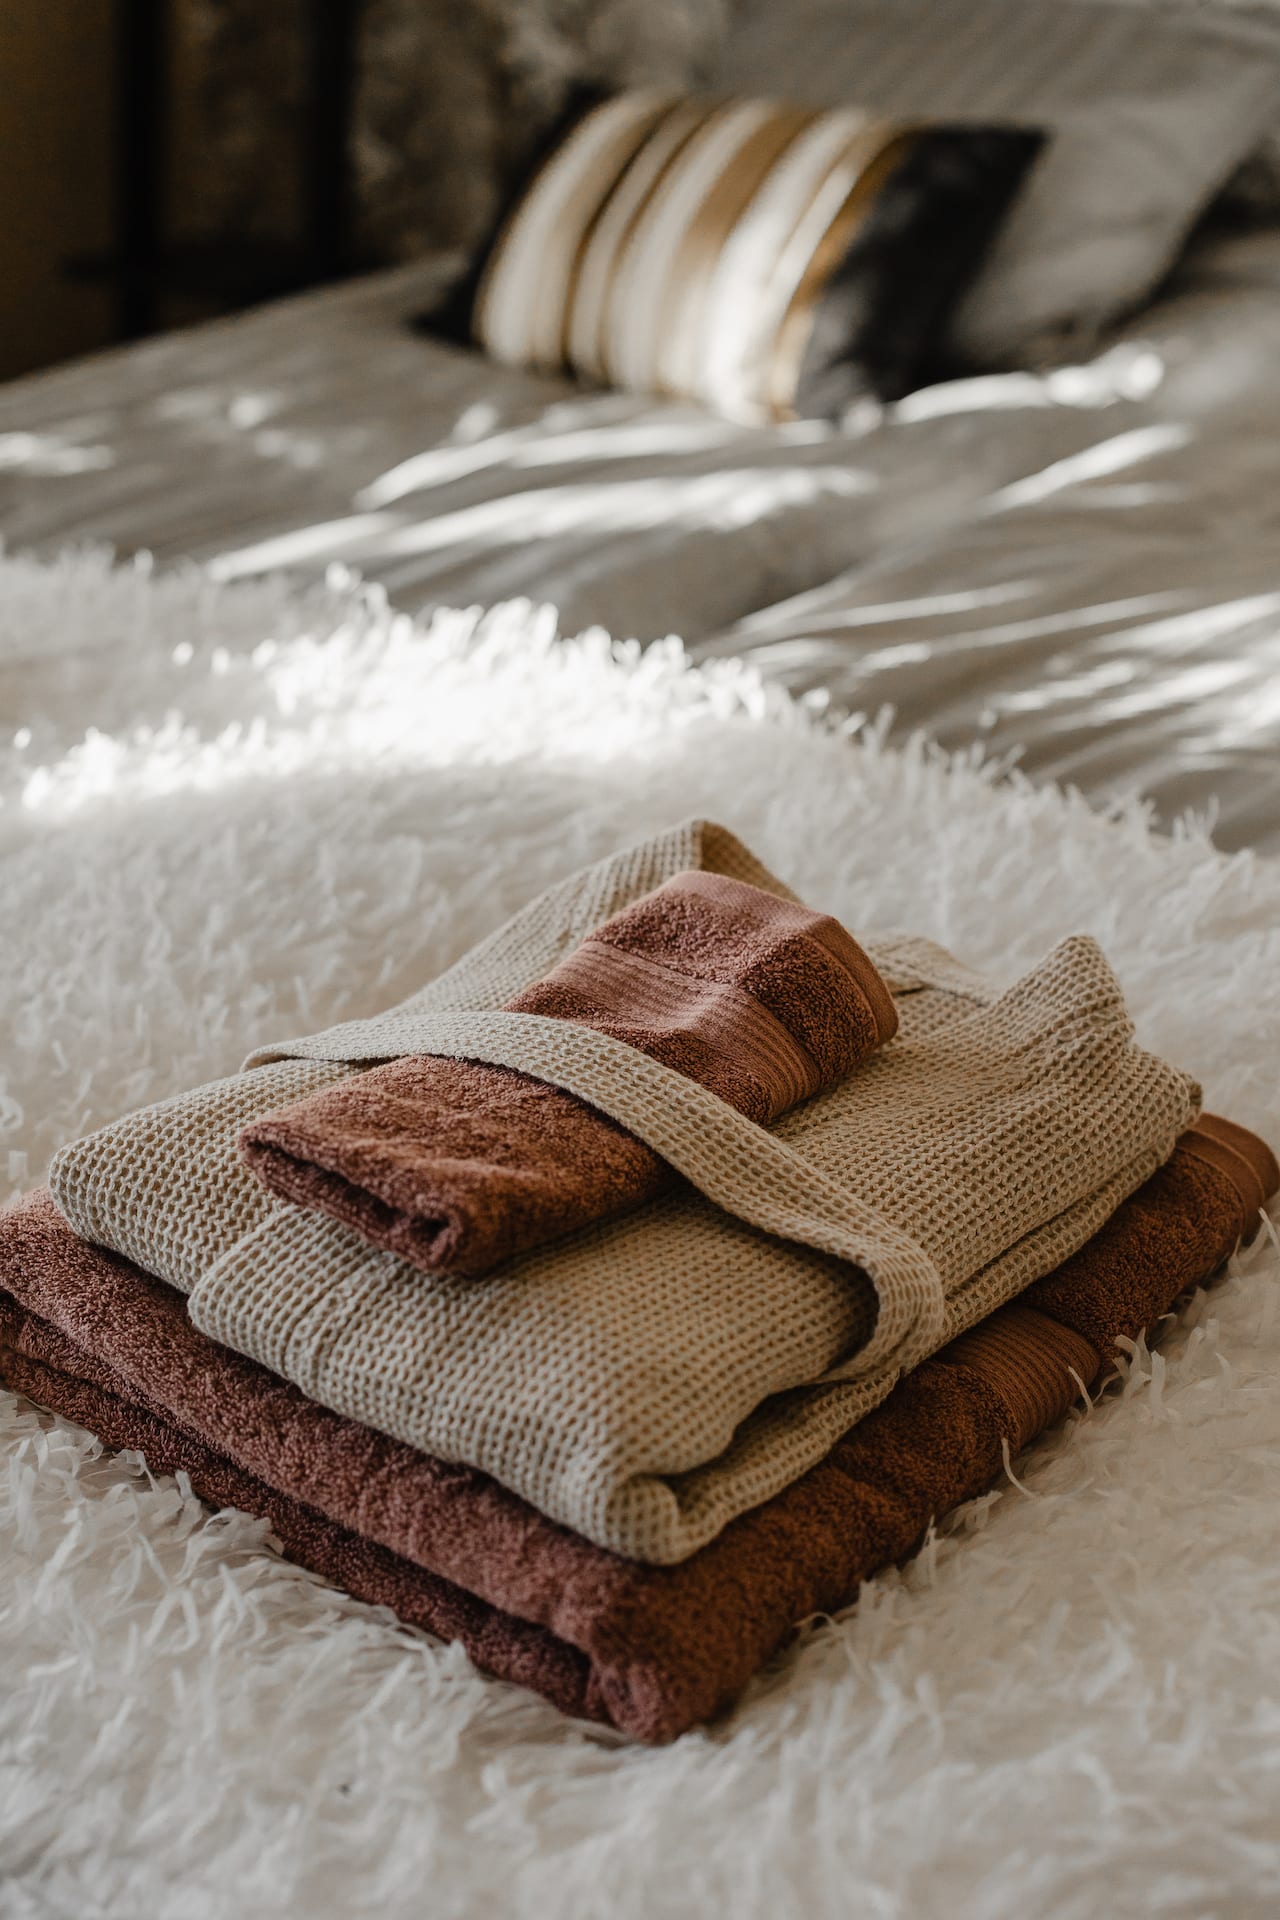 Luxurious bath rope and towels beautifully set on a bed to wait for the guests at the accomodation